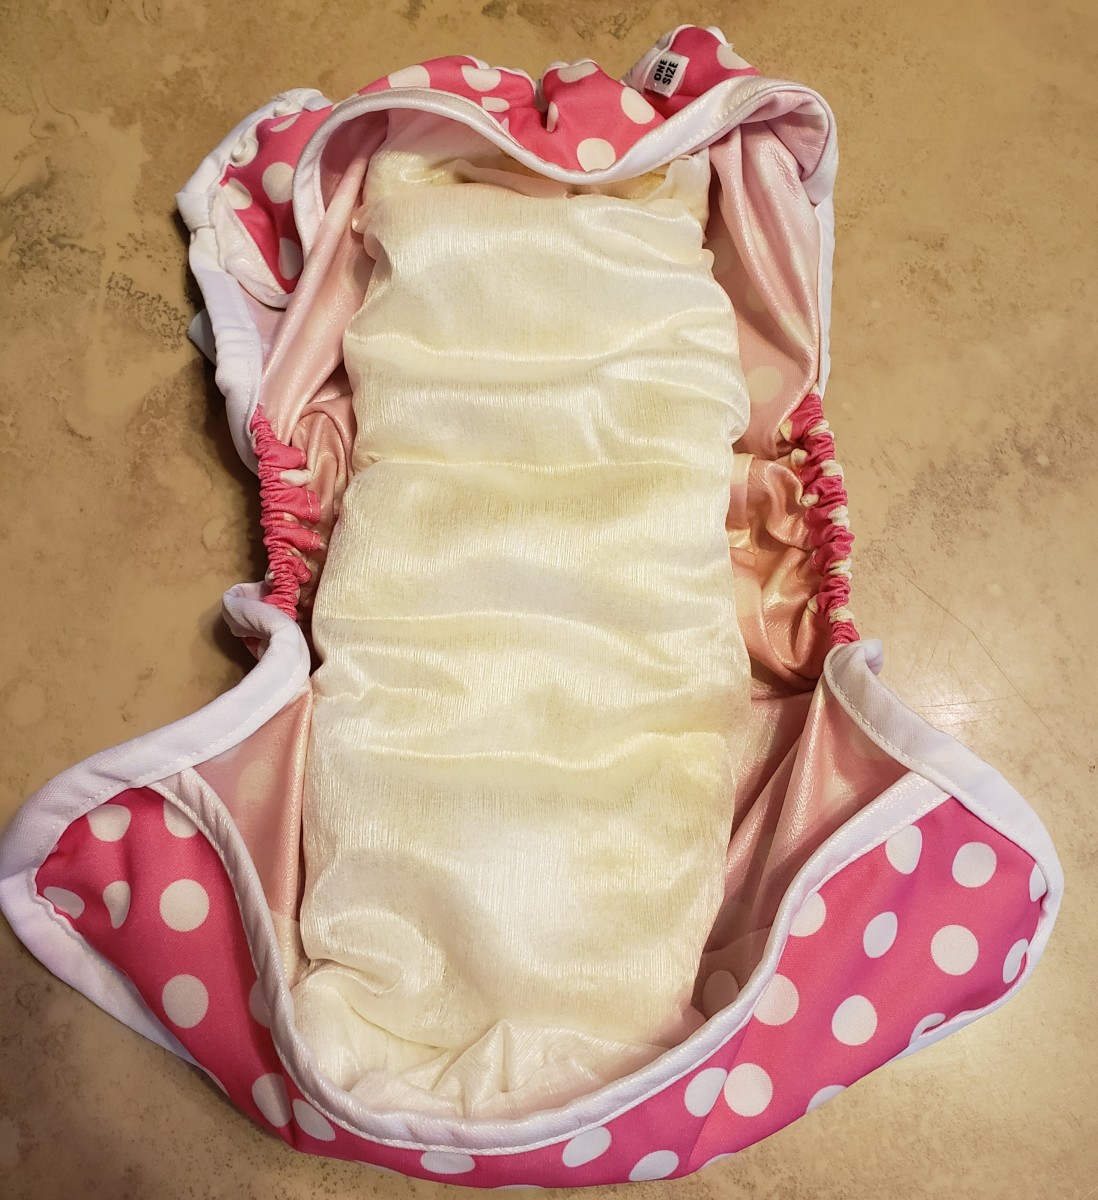 Fully Assembled Diaper and Cover: the diaper, liner and booster flip over and snap right into the cover.  Once soiled, just unsnap the diaper, remove the liner and throw it and solids away. The covers come in lots of adorable patterns (above)